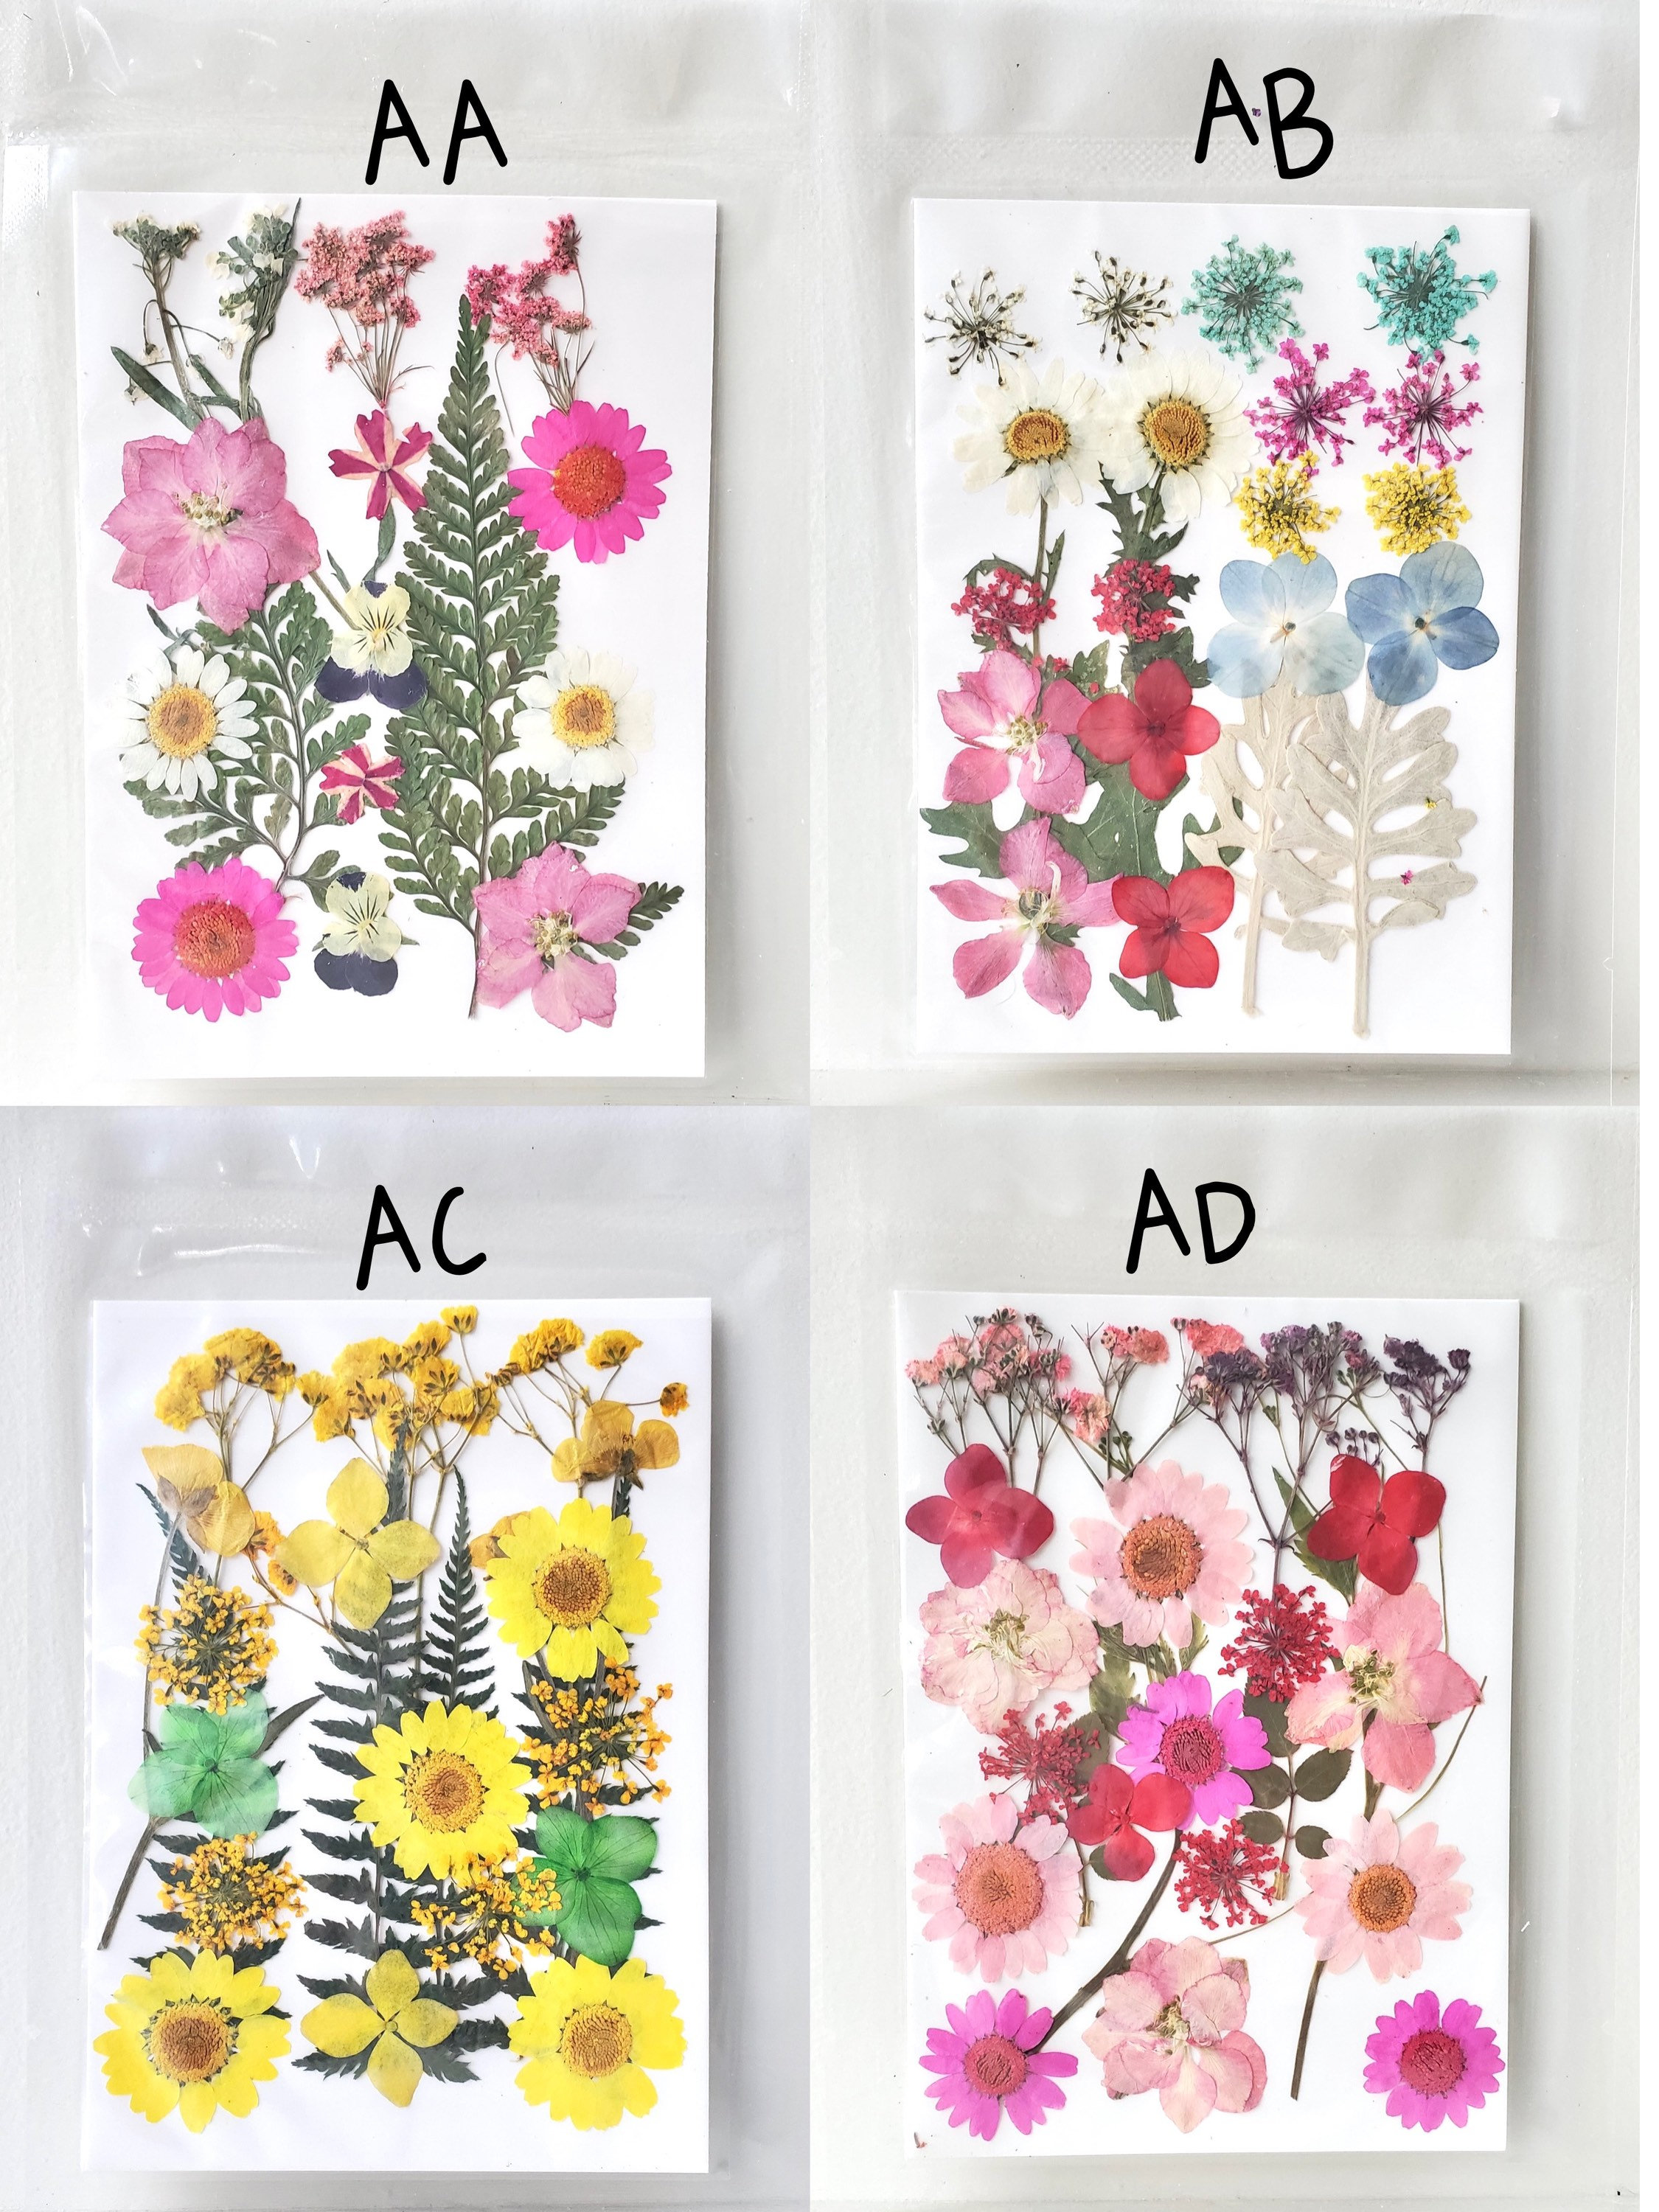 Dried Flowers Daisy Pressed Flowers For Resin Cardmaking pack of 20